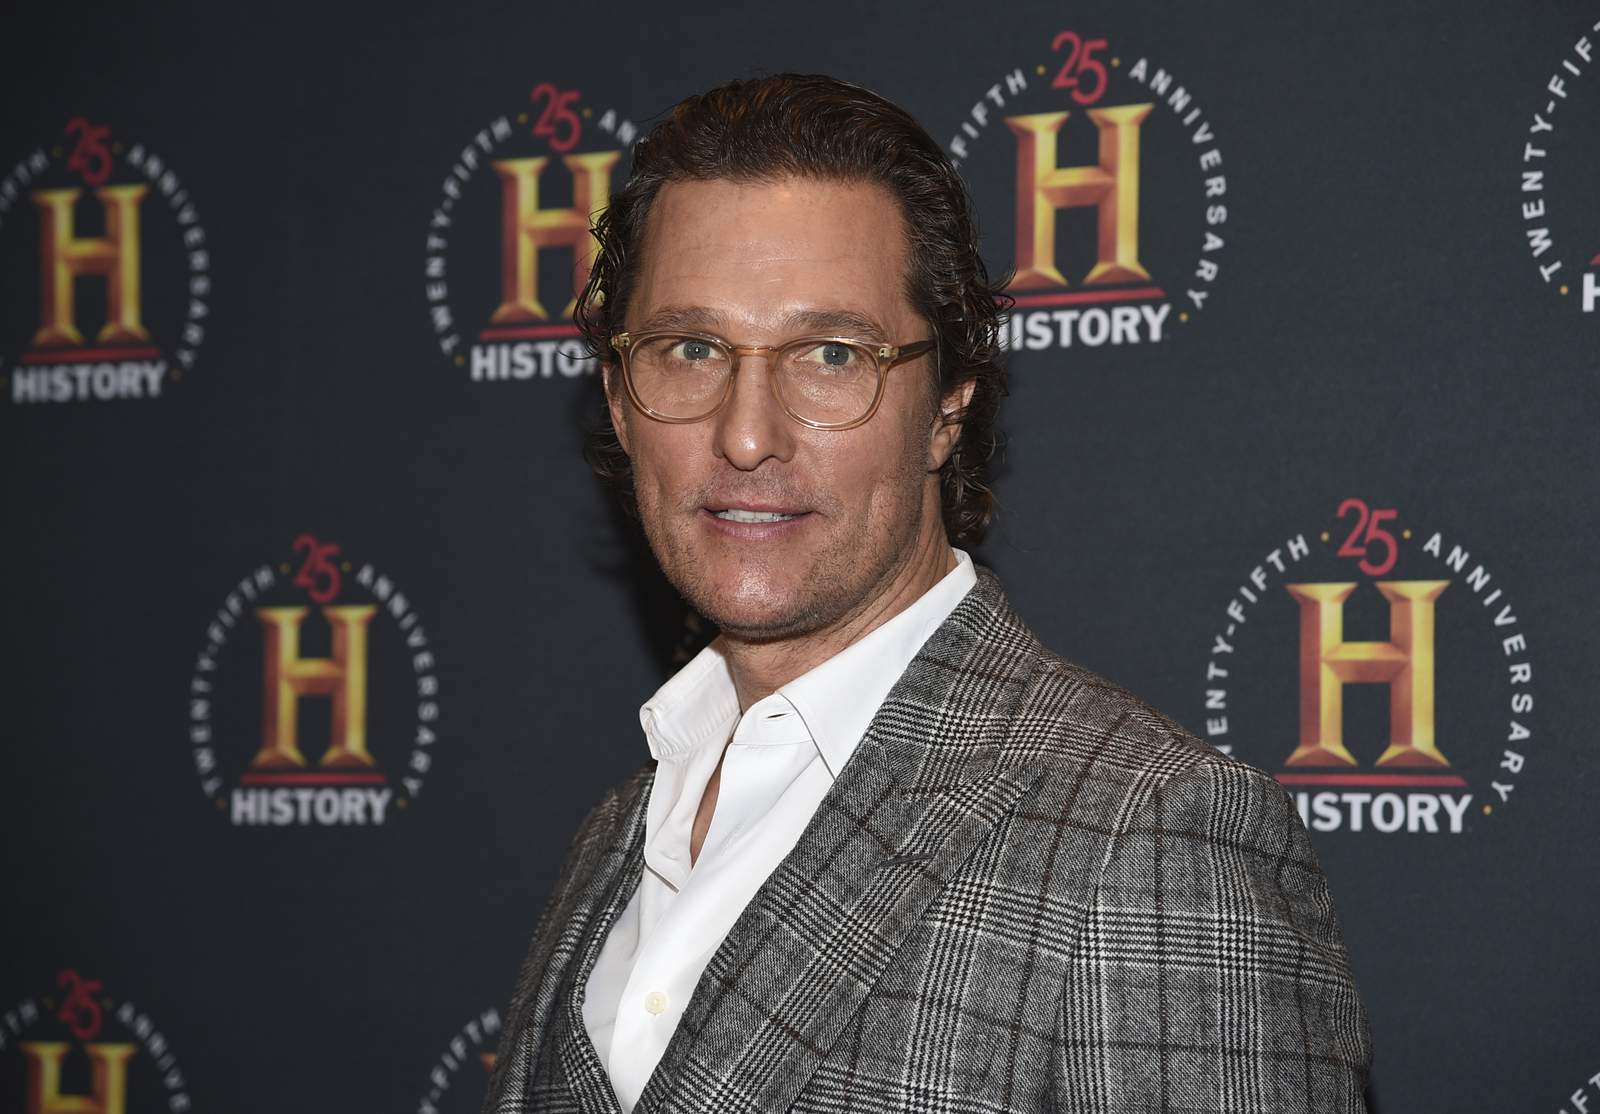 Matthew McConaughey says he is considering running for Texas governor